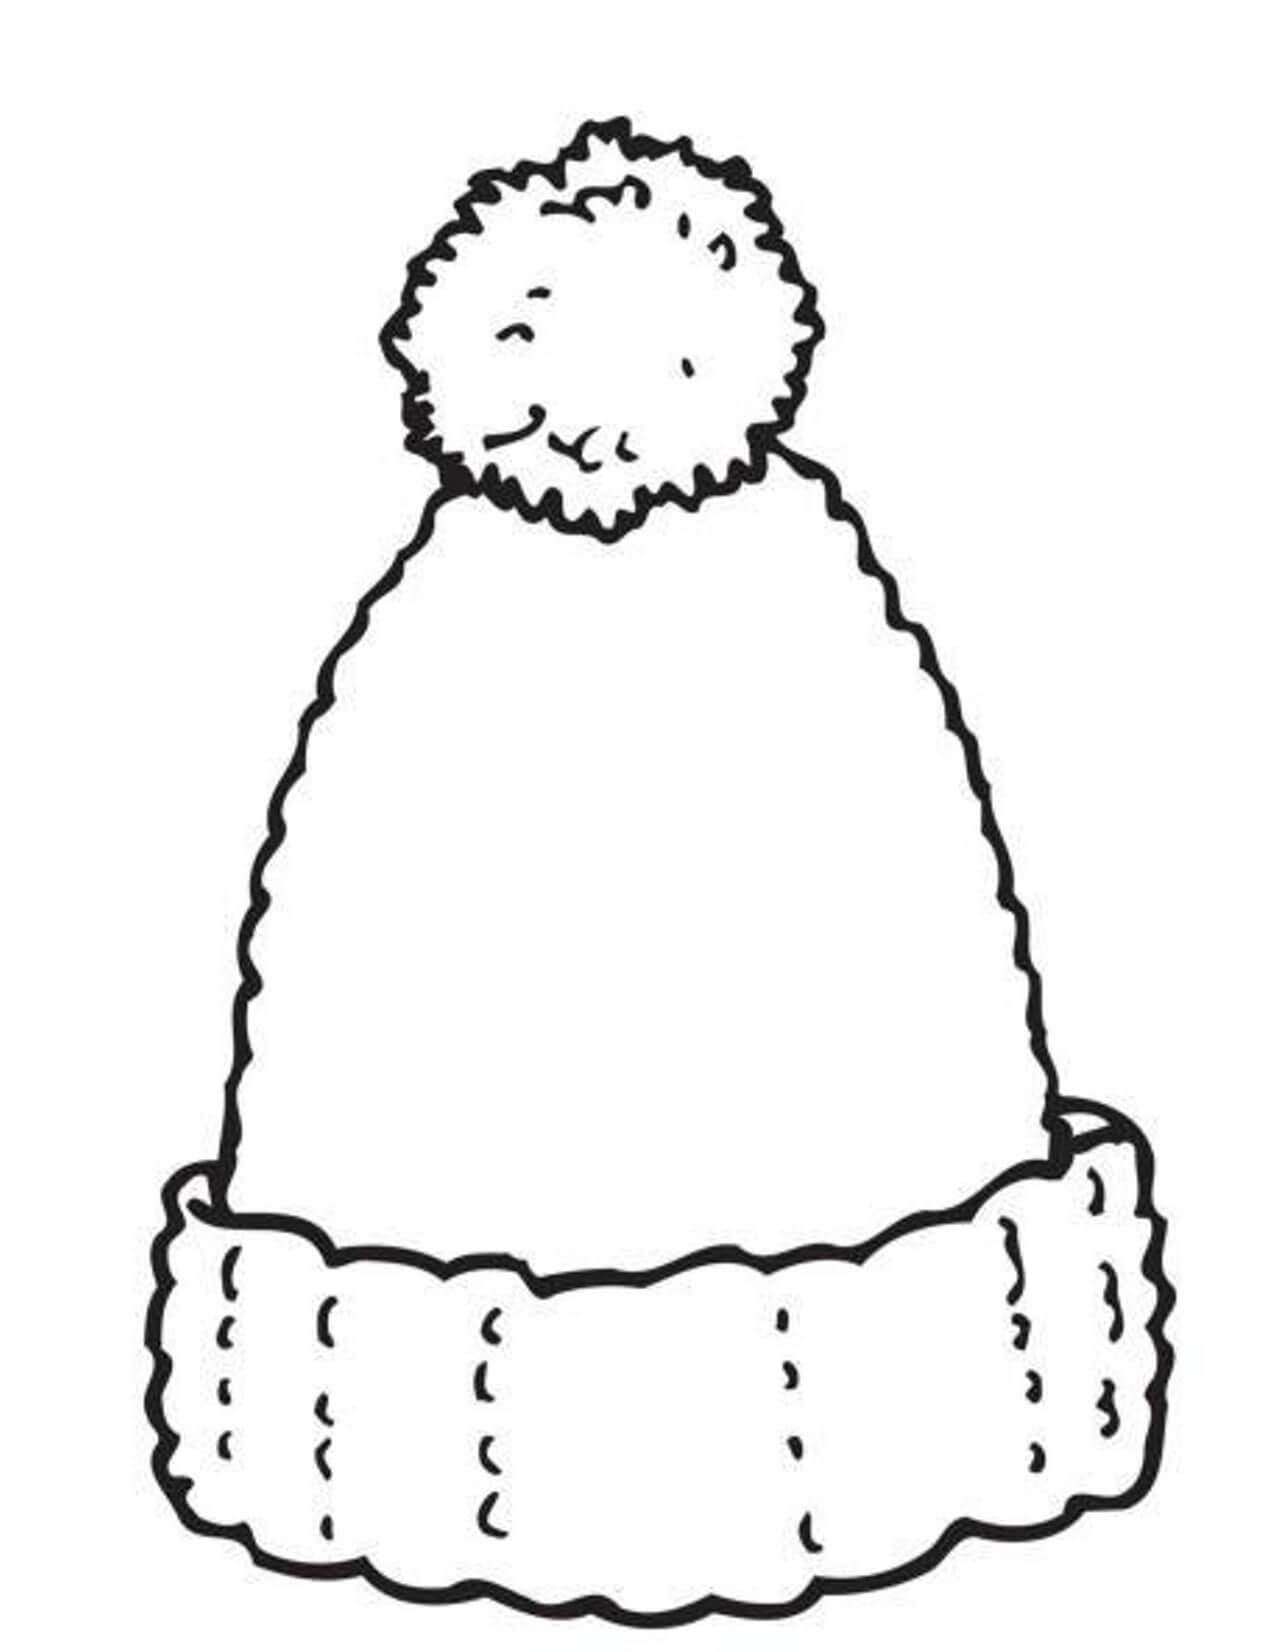 Winter Hat in January Coloring Page